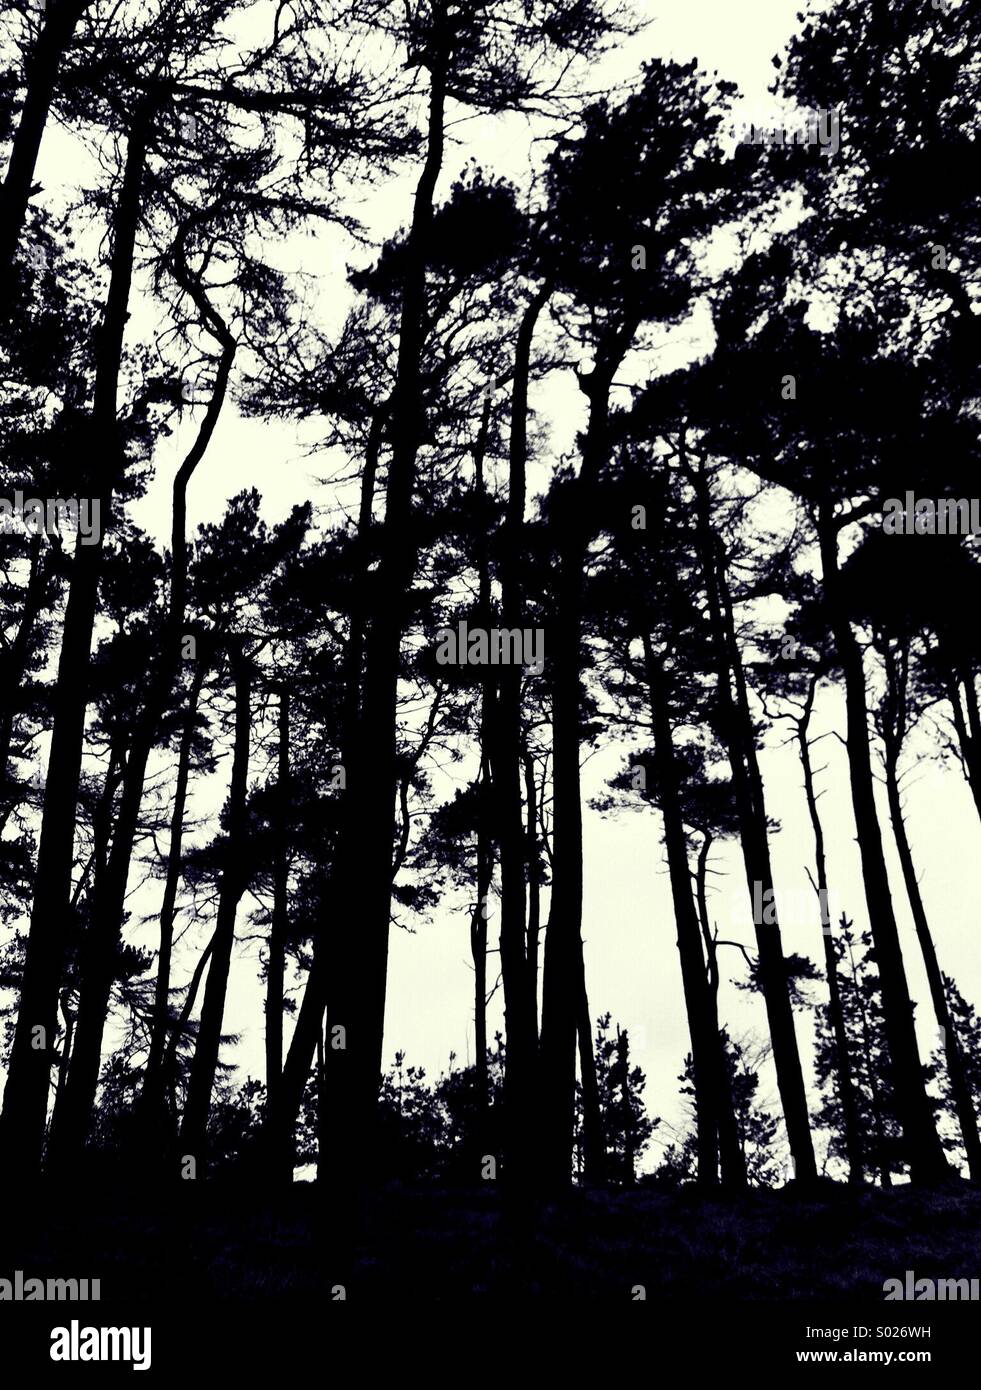 Trees in forest silhouettes Stock Photo